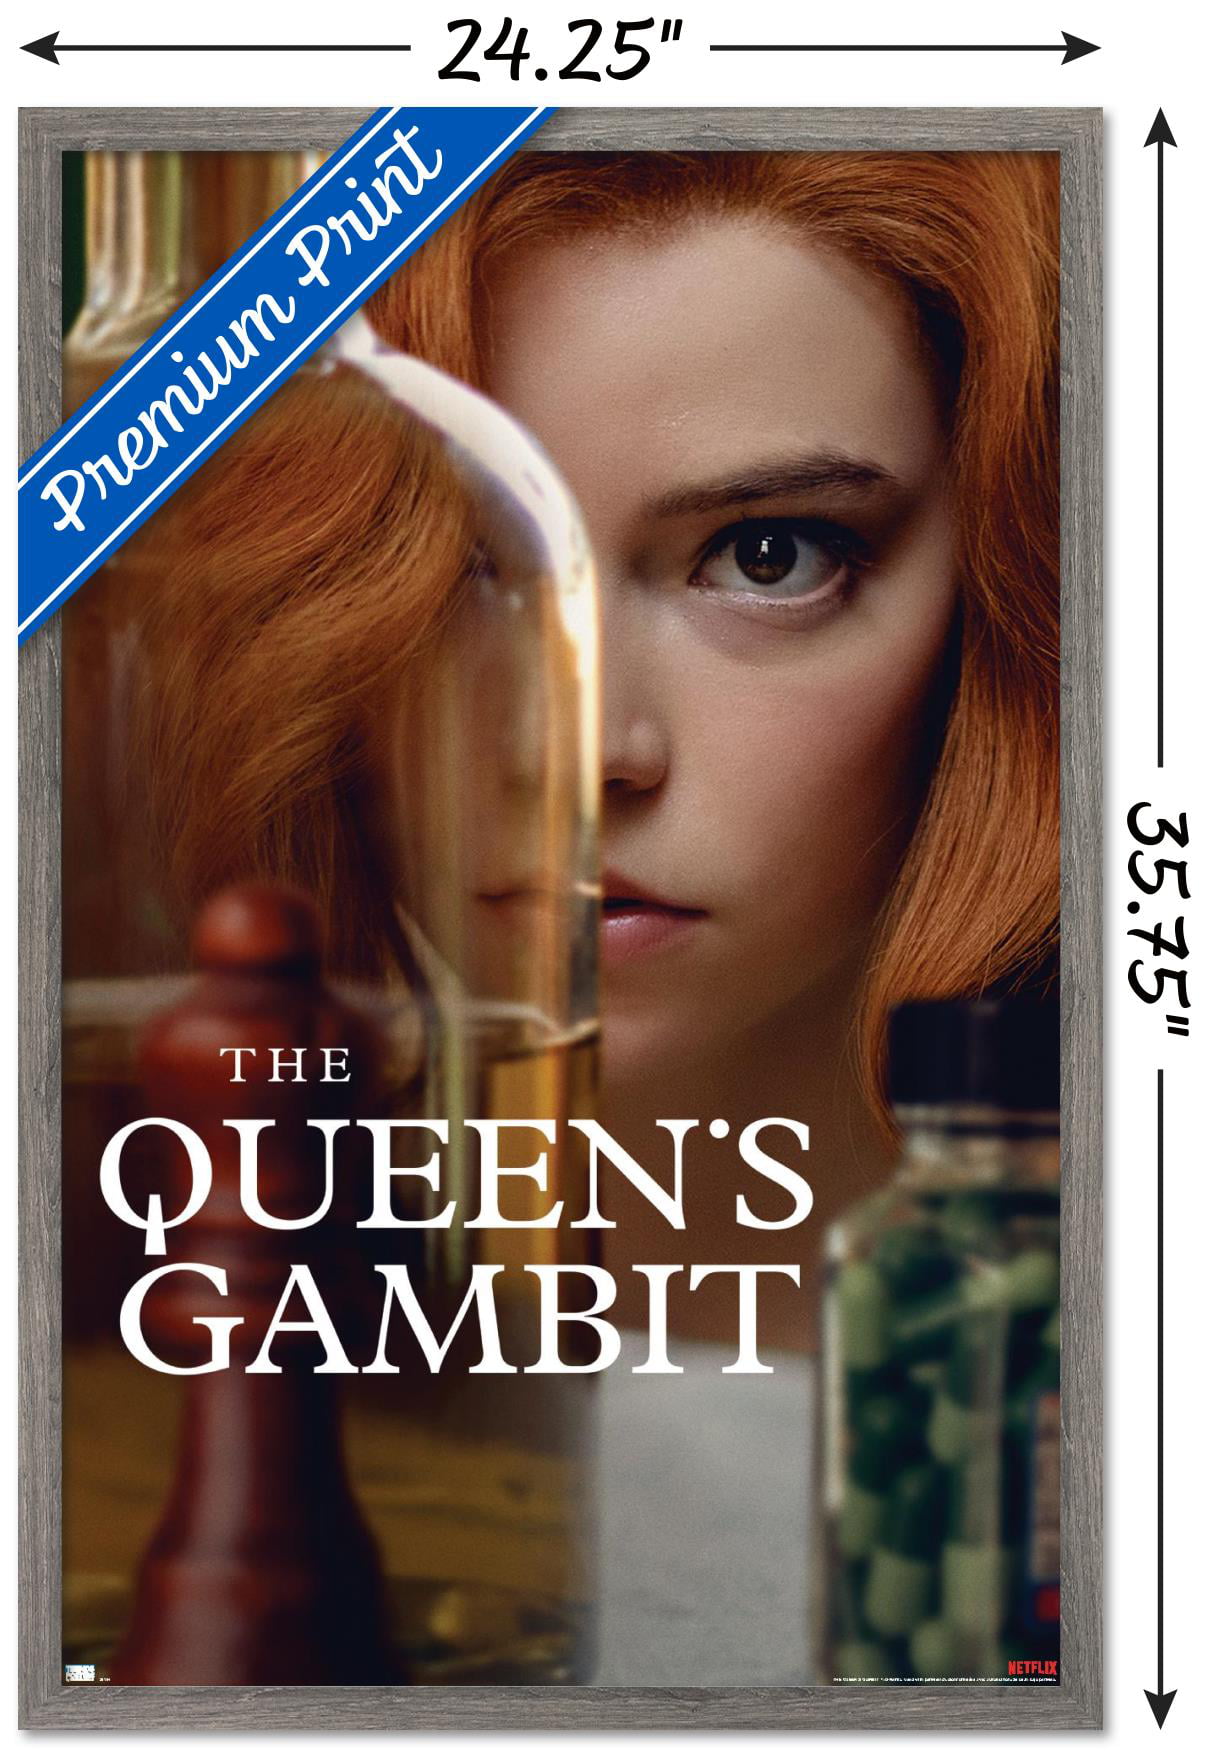 BuzzScreenReview: A Peek at The Queen's Gambit Plus the Many Shows Coming  to Netflix This Year.